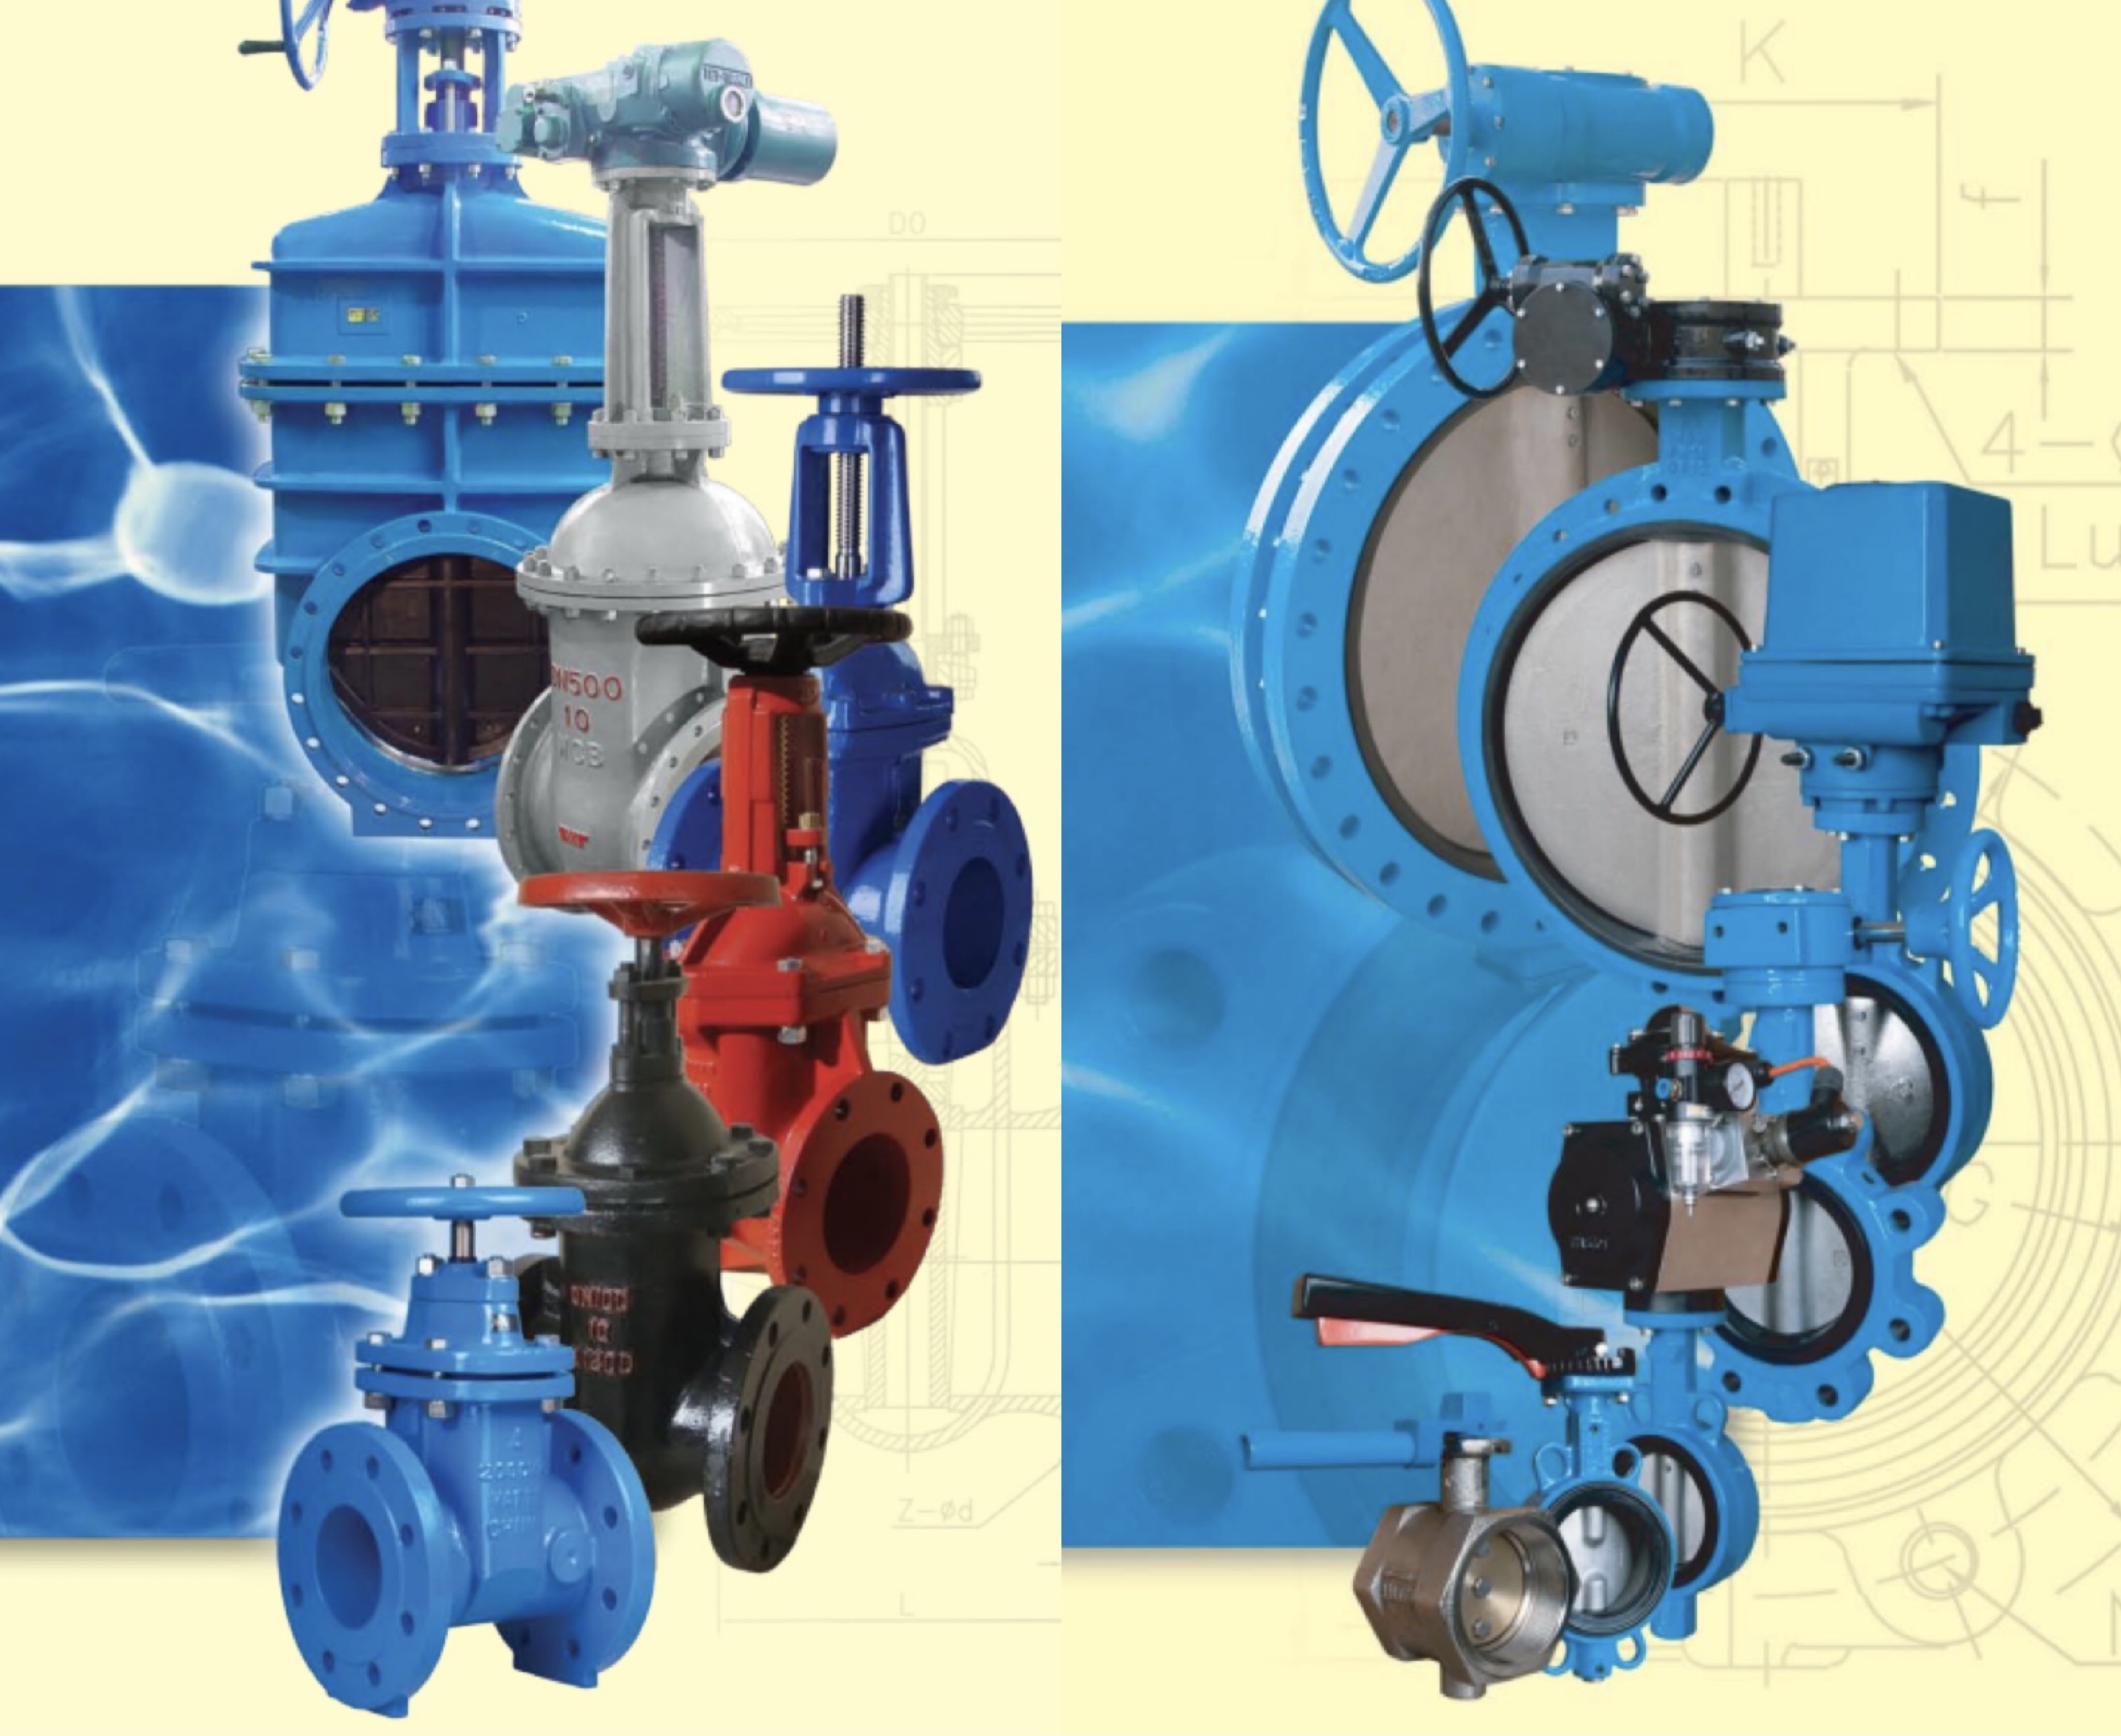 Comparison of gate valve and butterfly valve